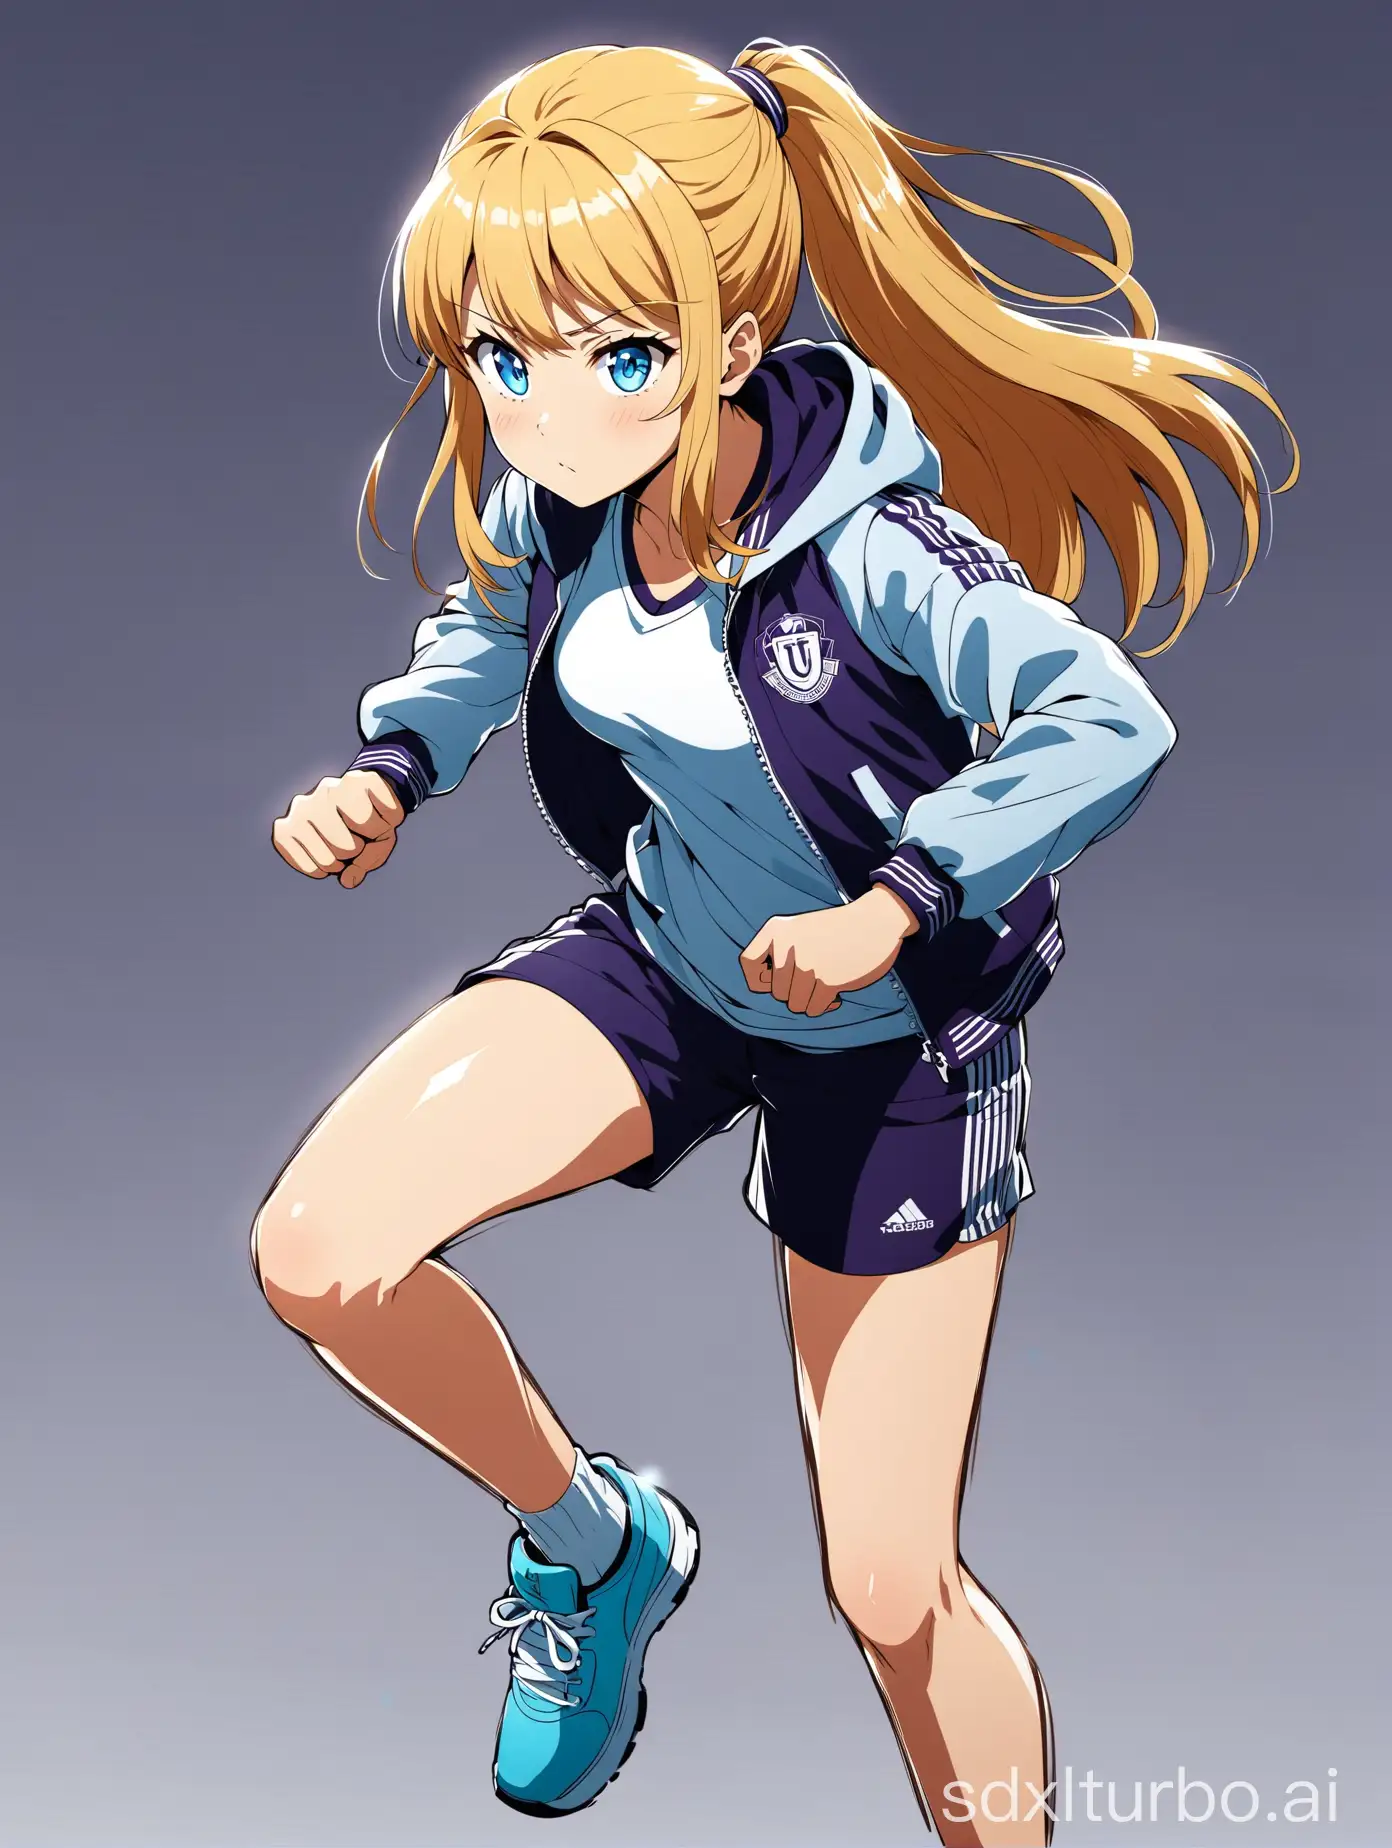 A thin low stature blonde teen girl, with frizzy long hair, with curly bangs and pony tail, blue eyes, with grey-violet university jacket, doing gym exercises, serious face, Tatsuki Fujimoto style